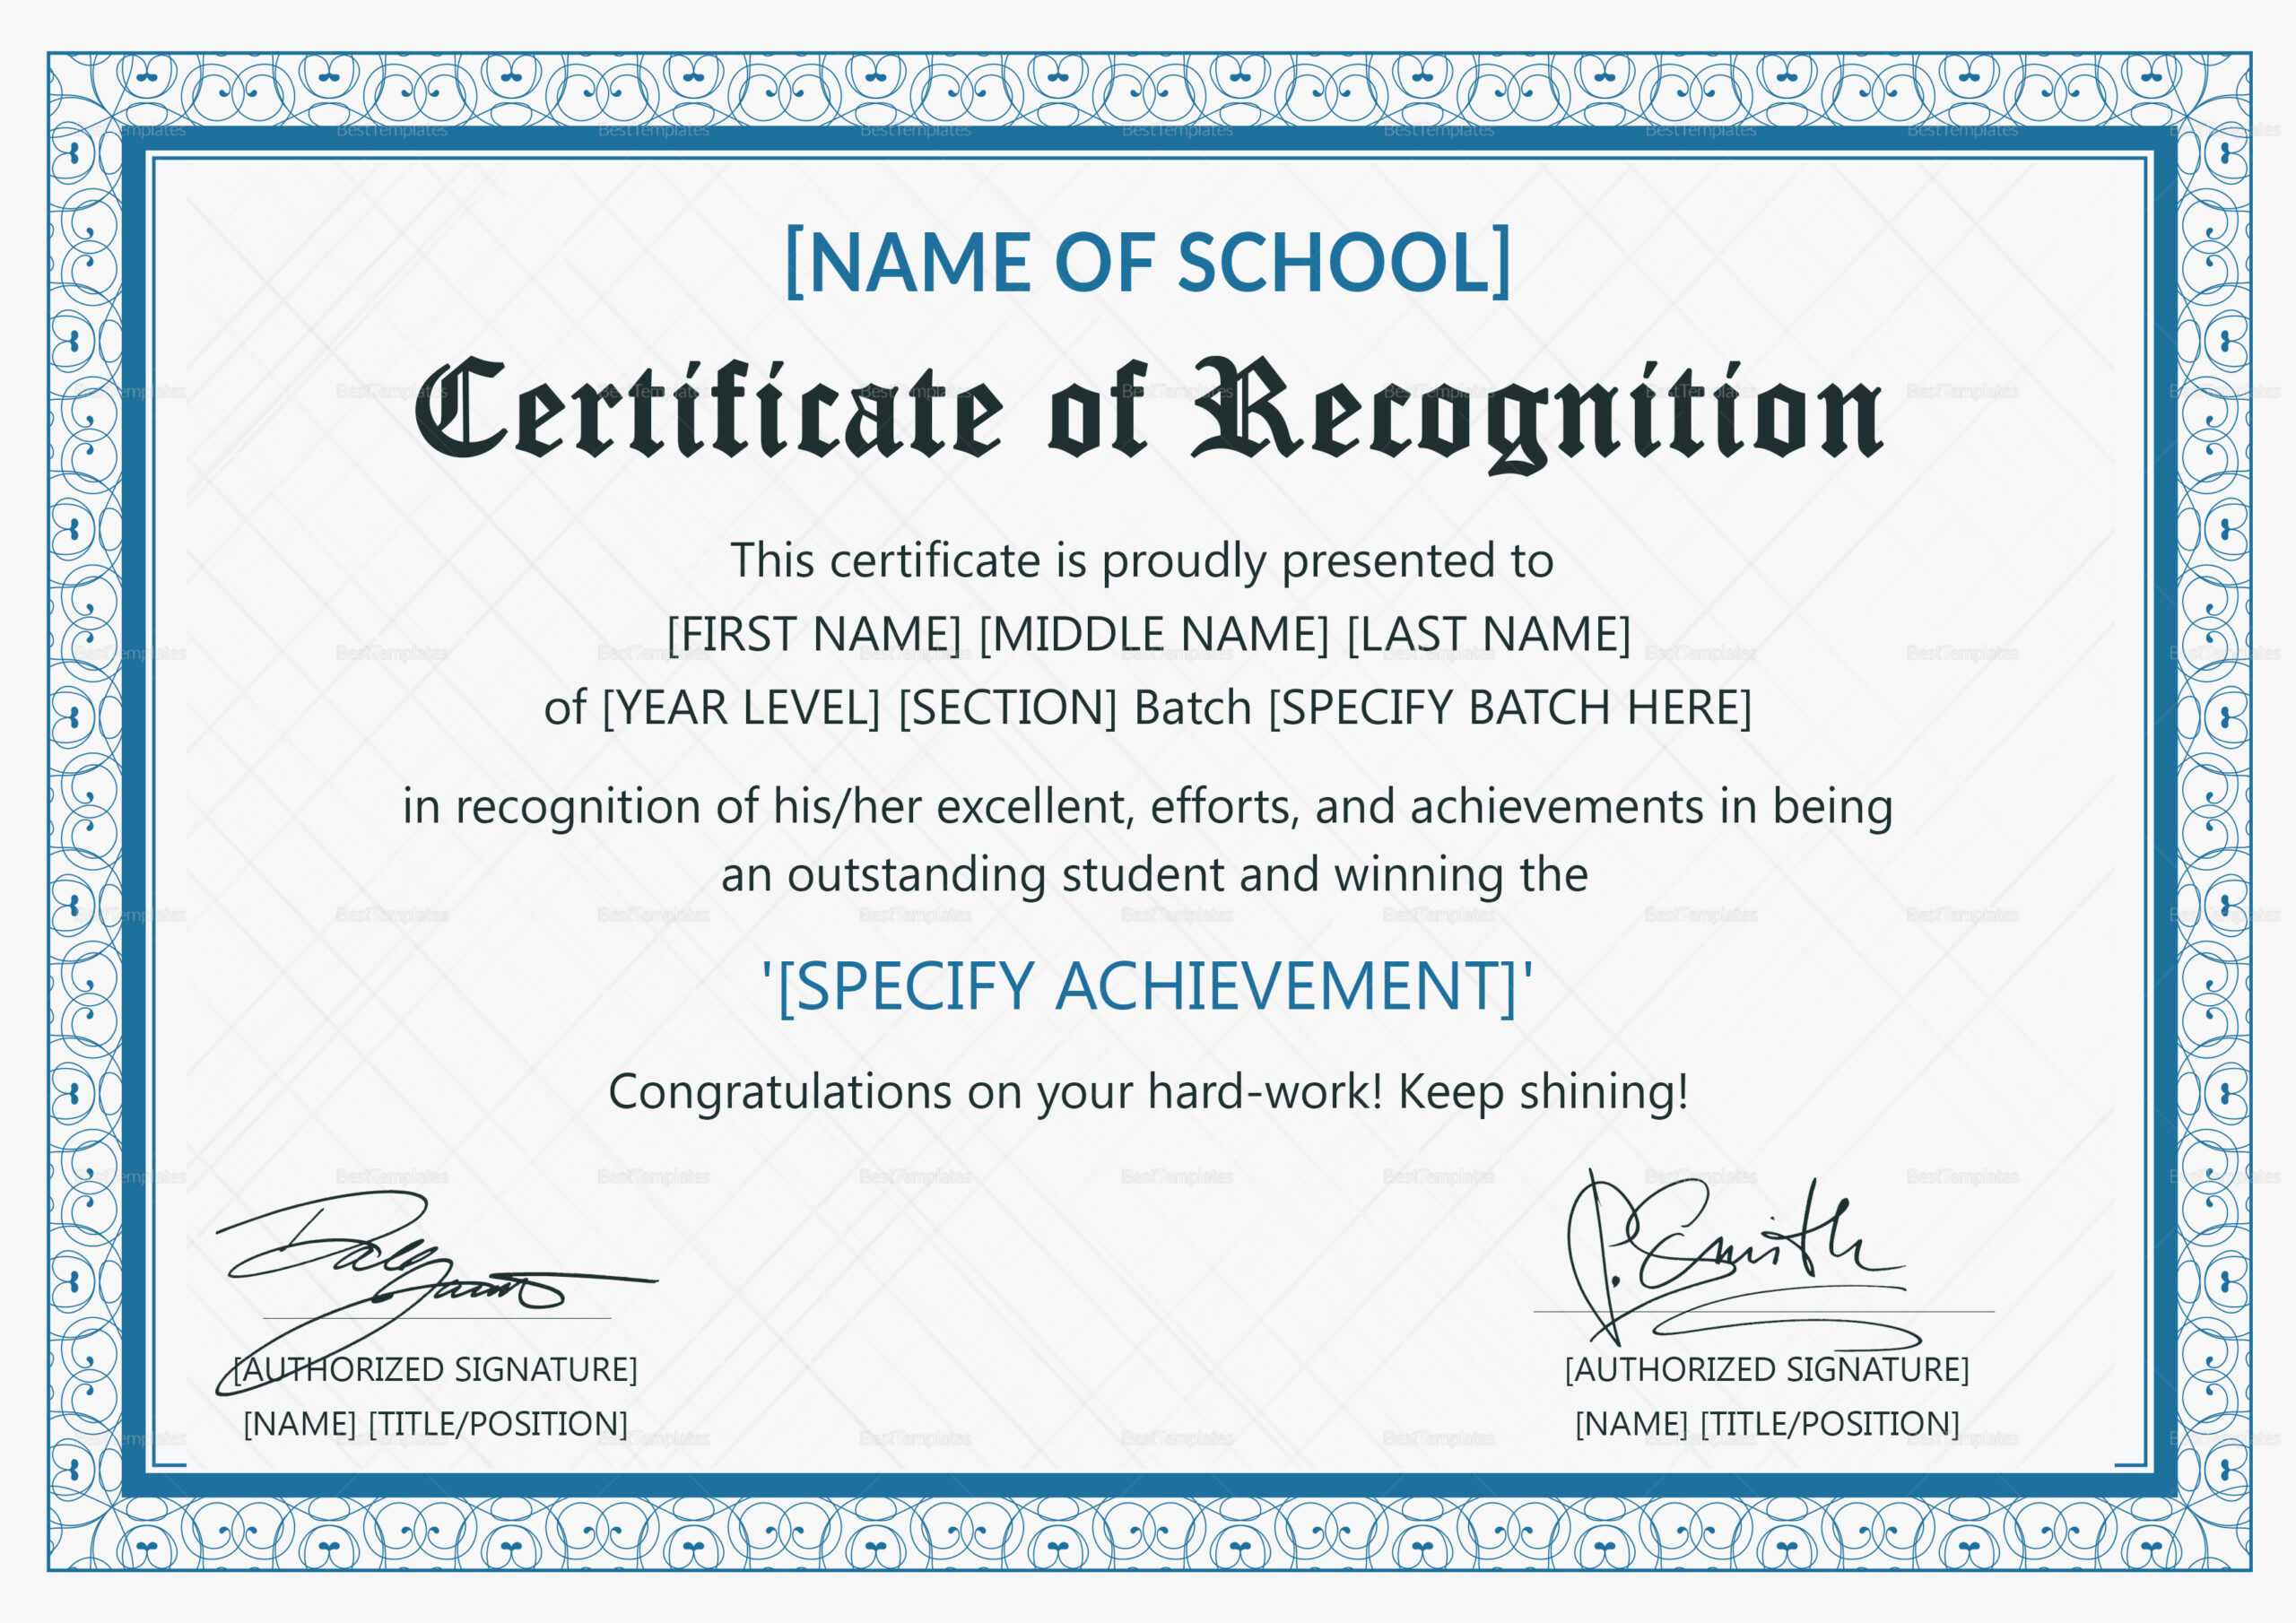 Certificate Of Recognition Template Letter Sample Award In Certificate Of Recognition Word Template